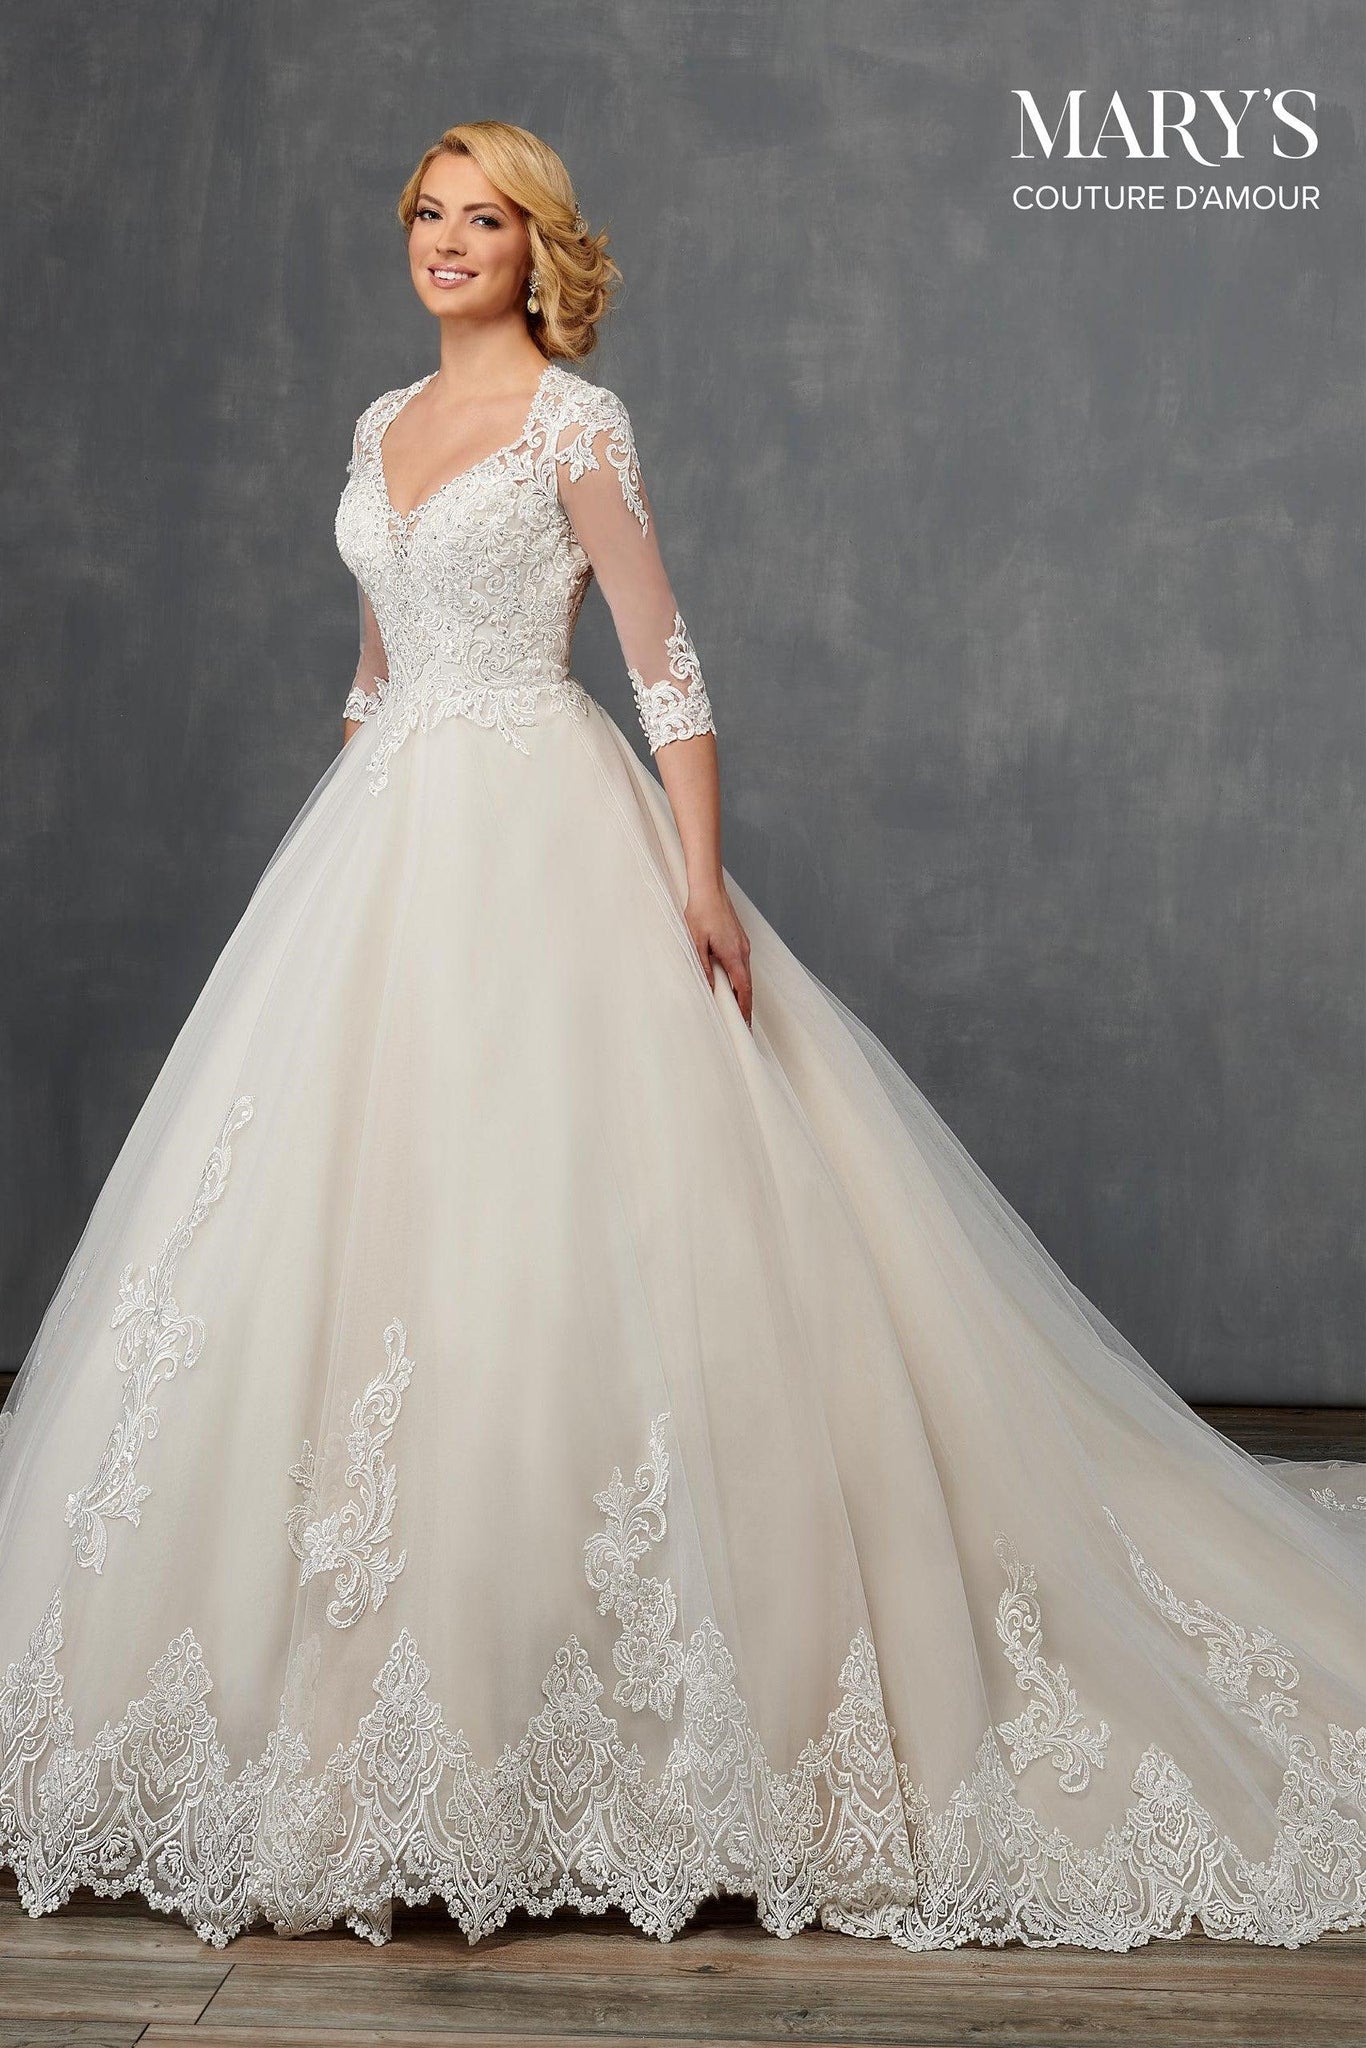 UK22 Beatrice - Adore Bridal and Occasion Wear